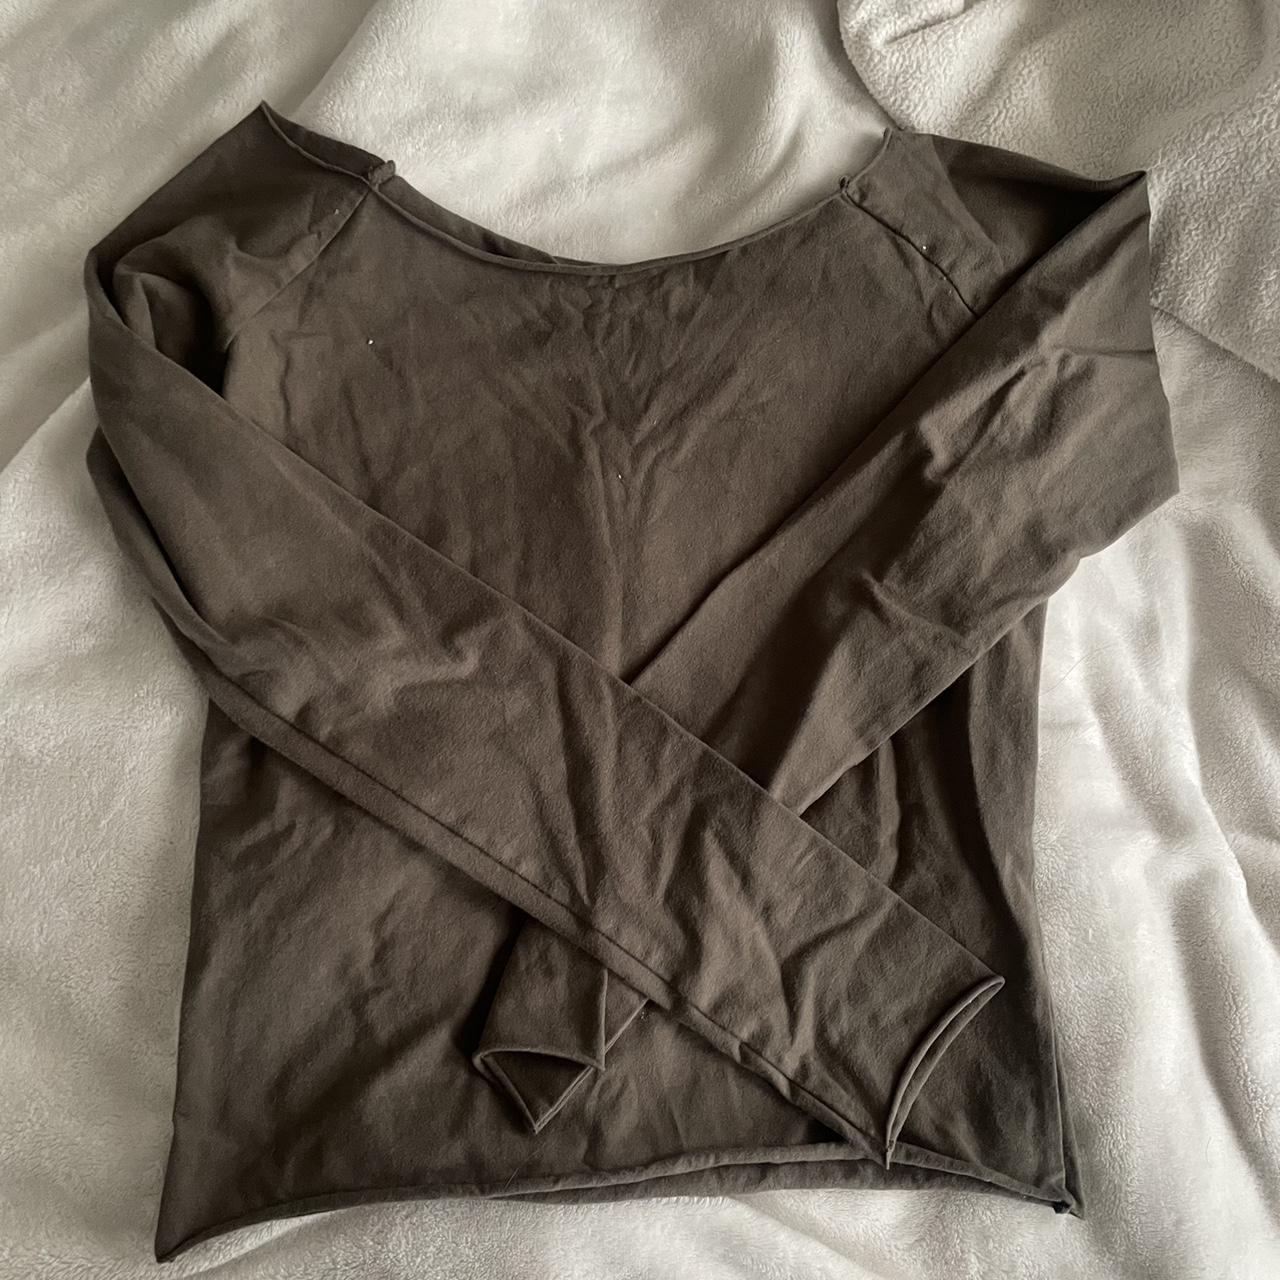 Brandy Melville olive green Bonnie top